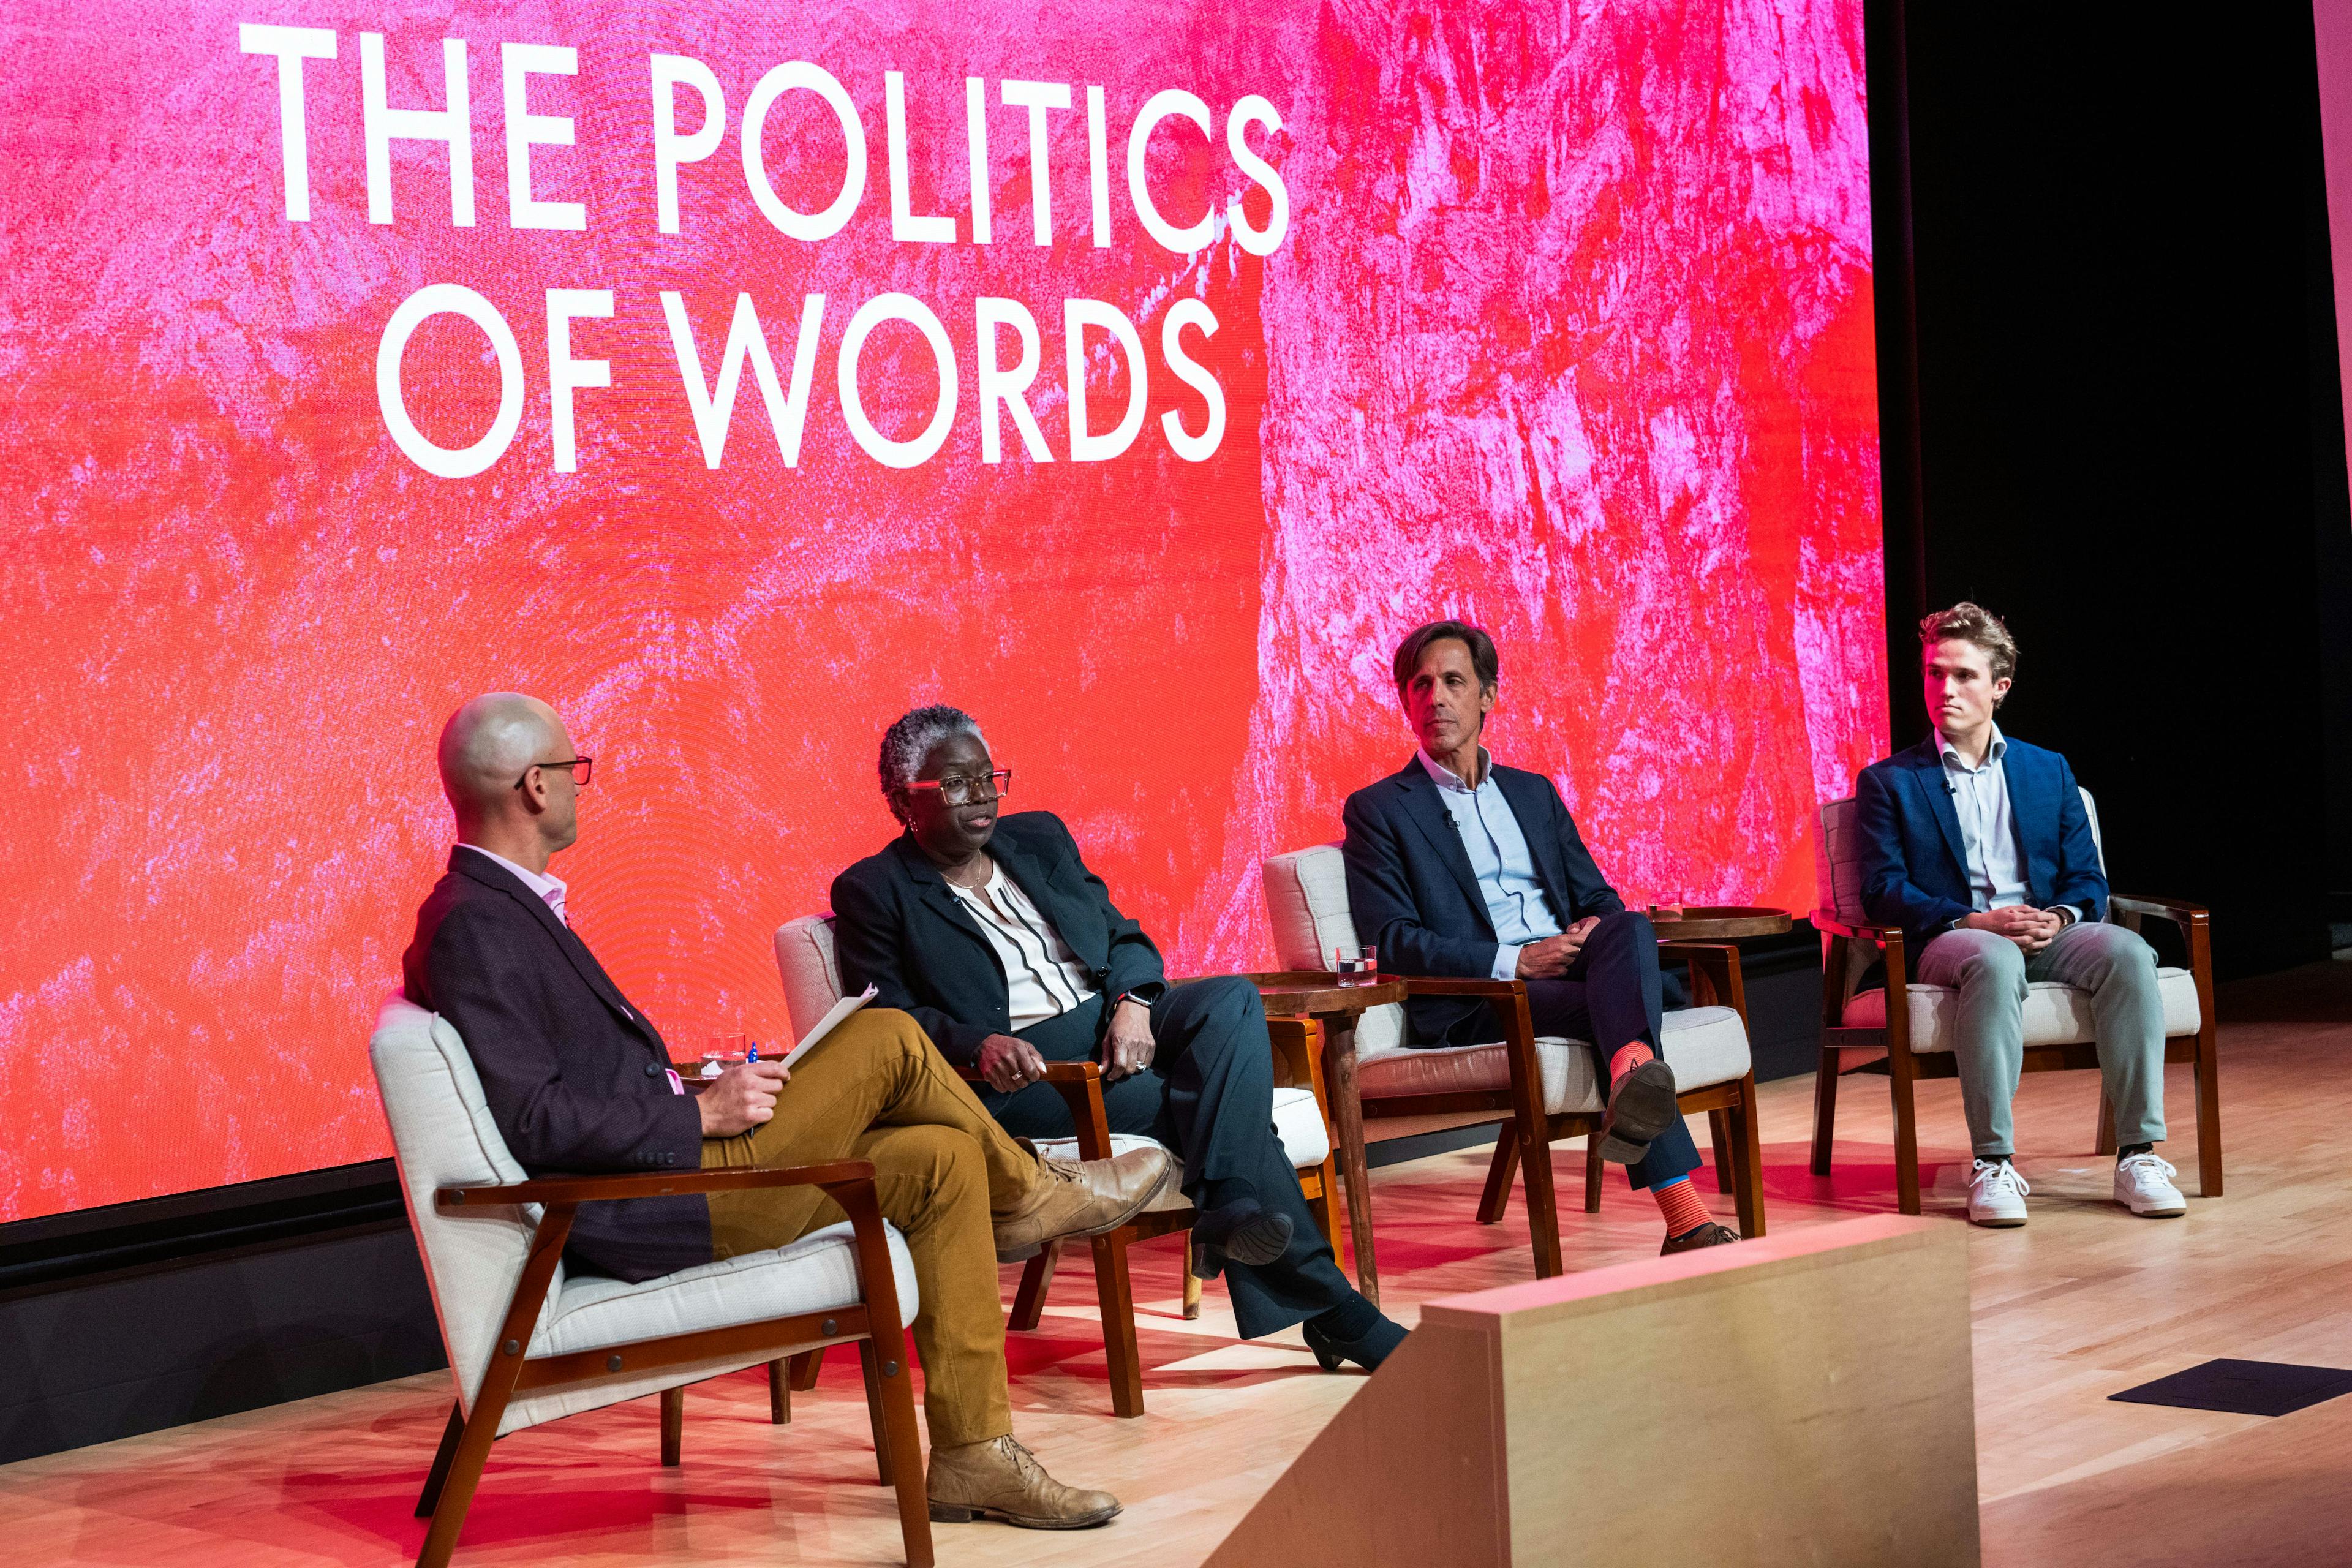 A group of 4 people sitting on chairs in front of a stage with "The Politics of Words" projected in the background